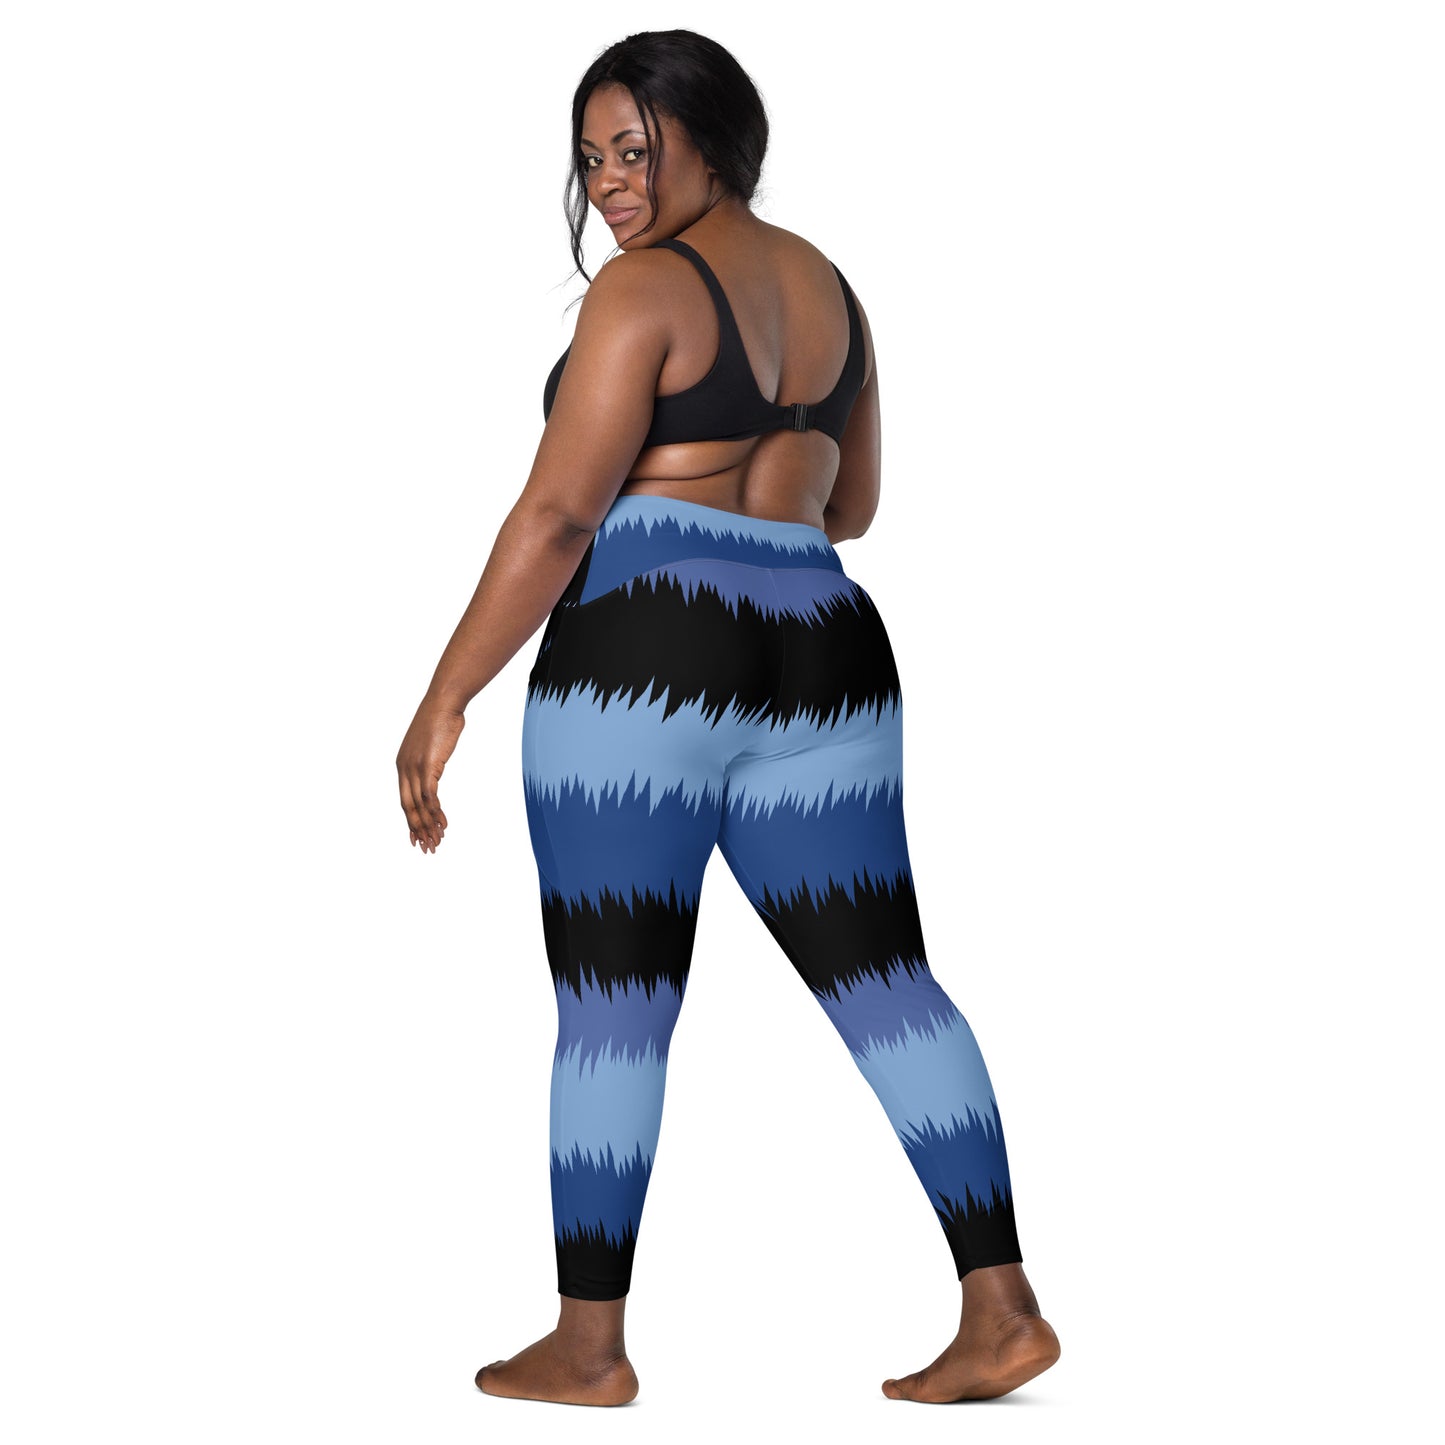 Ripped Blue Crossover leggings with pockets